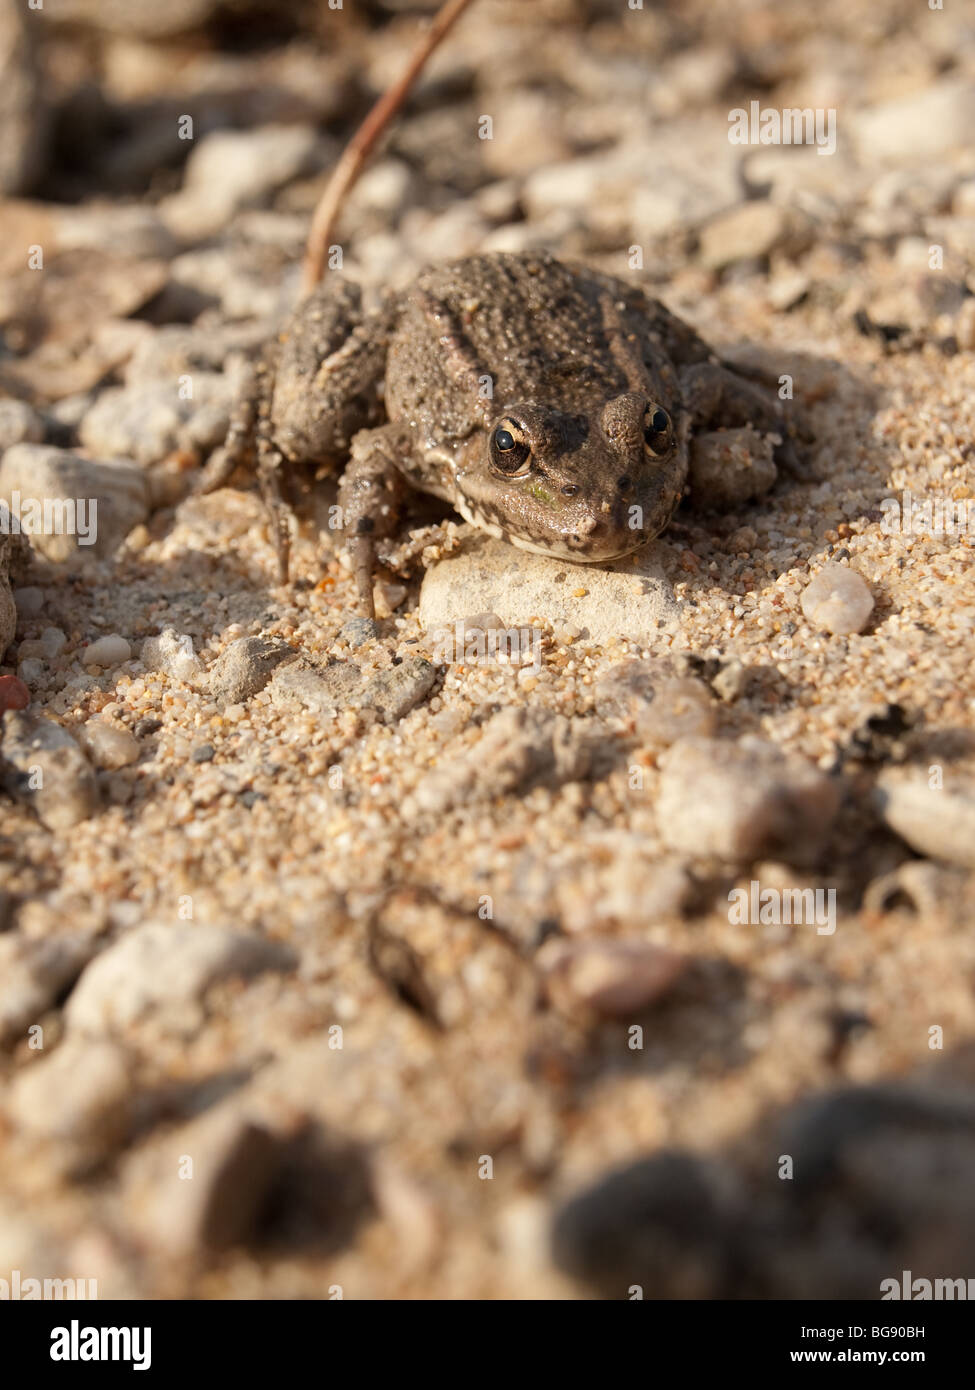 Close up of a green frog (Rana klepton esculenta) on sand, banks of river Loire, in Loiret, France. Stock Photo